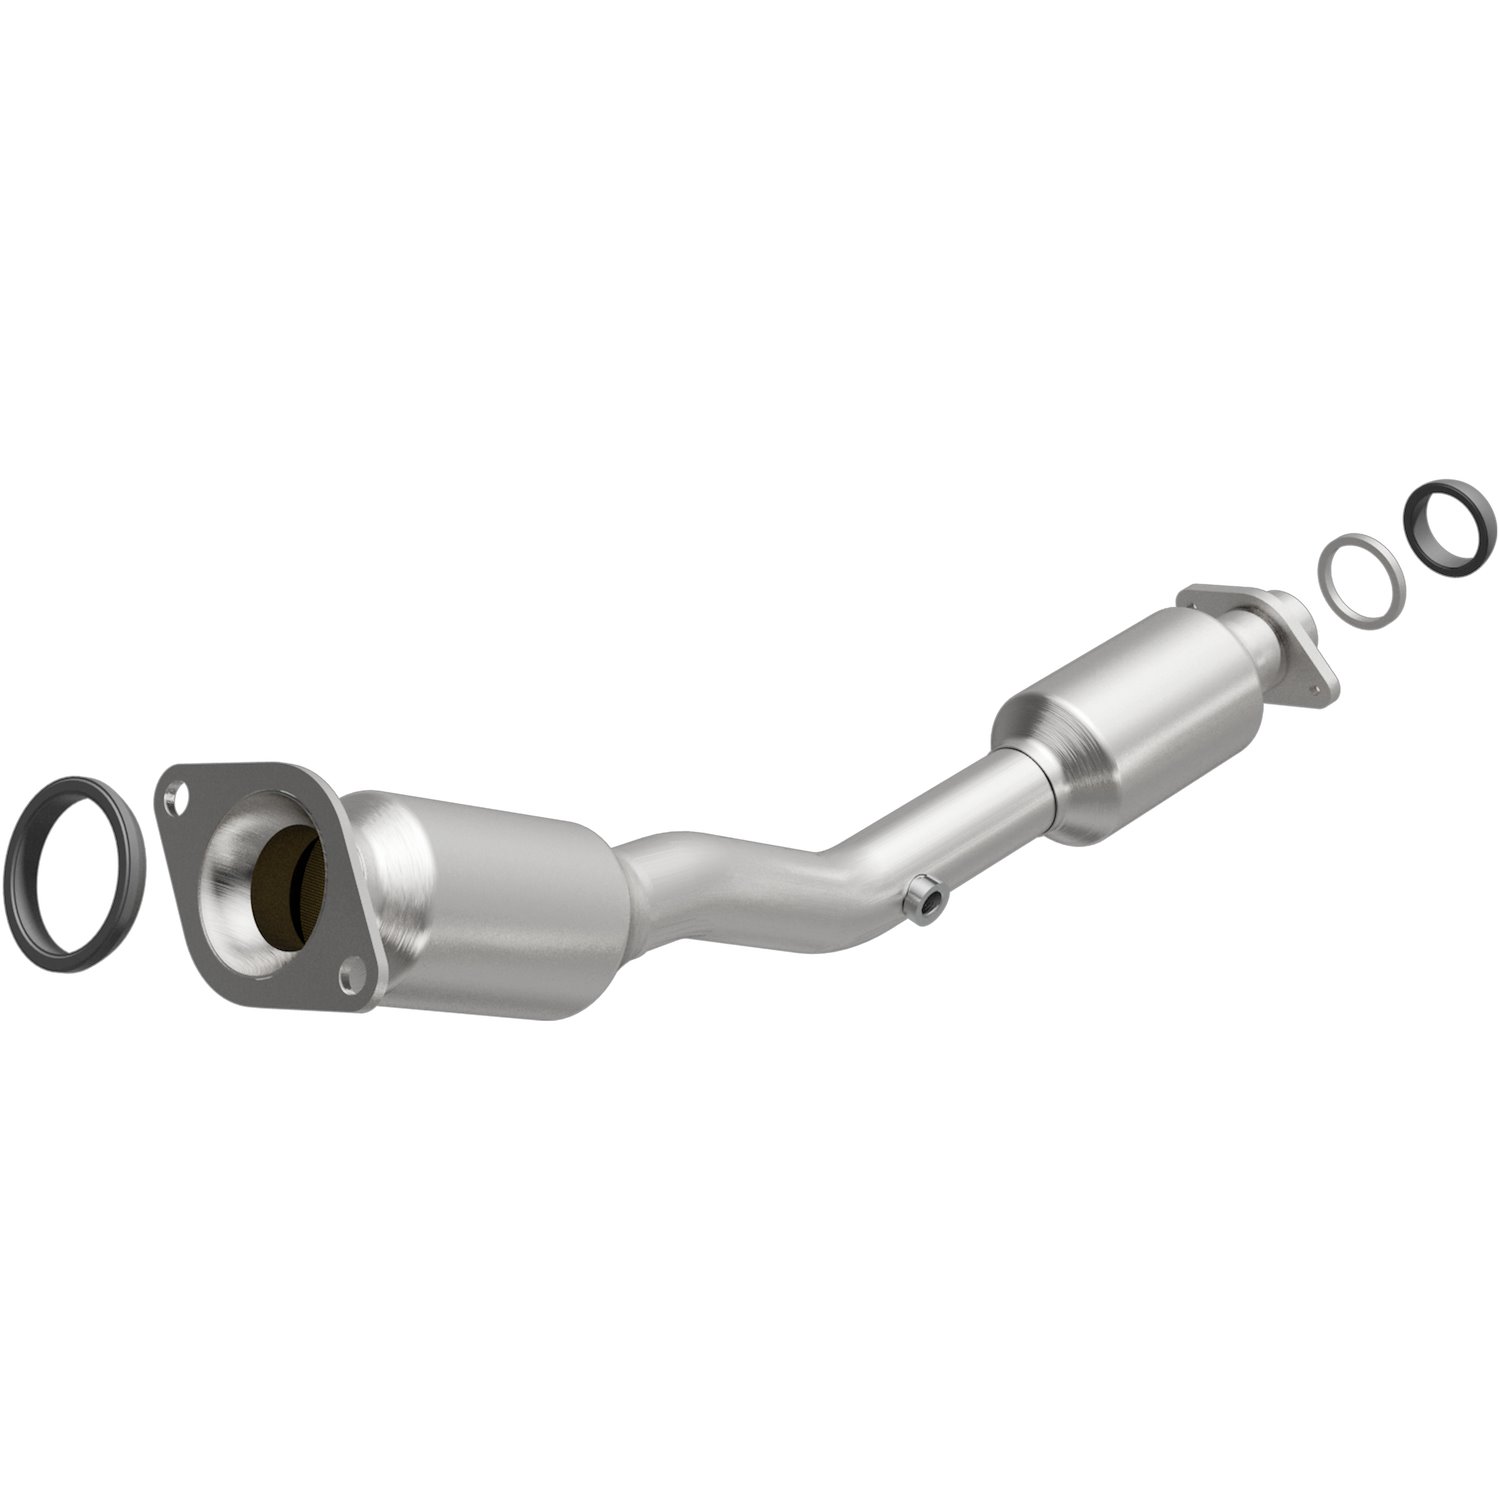 2009-2014 Nissan Cube California Grade CARB Compliant Direct-Fit Catalytic Converter